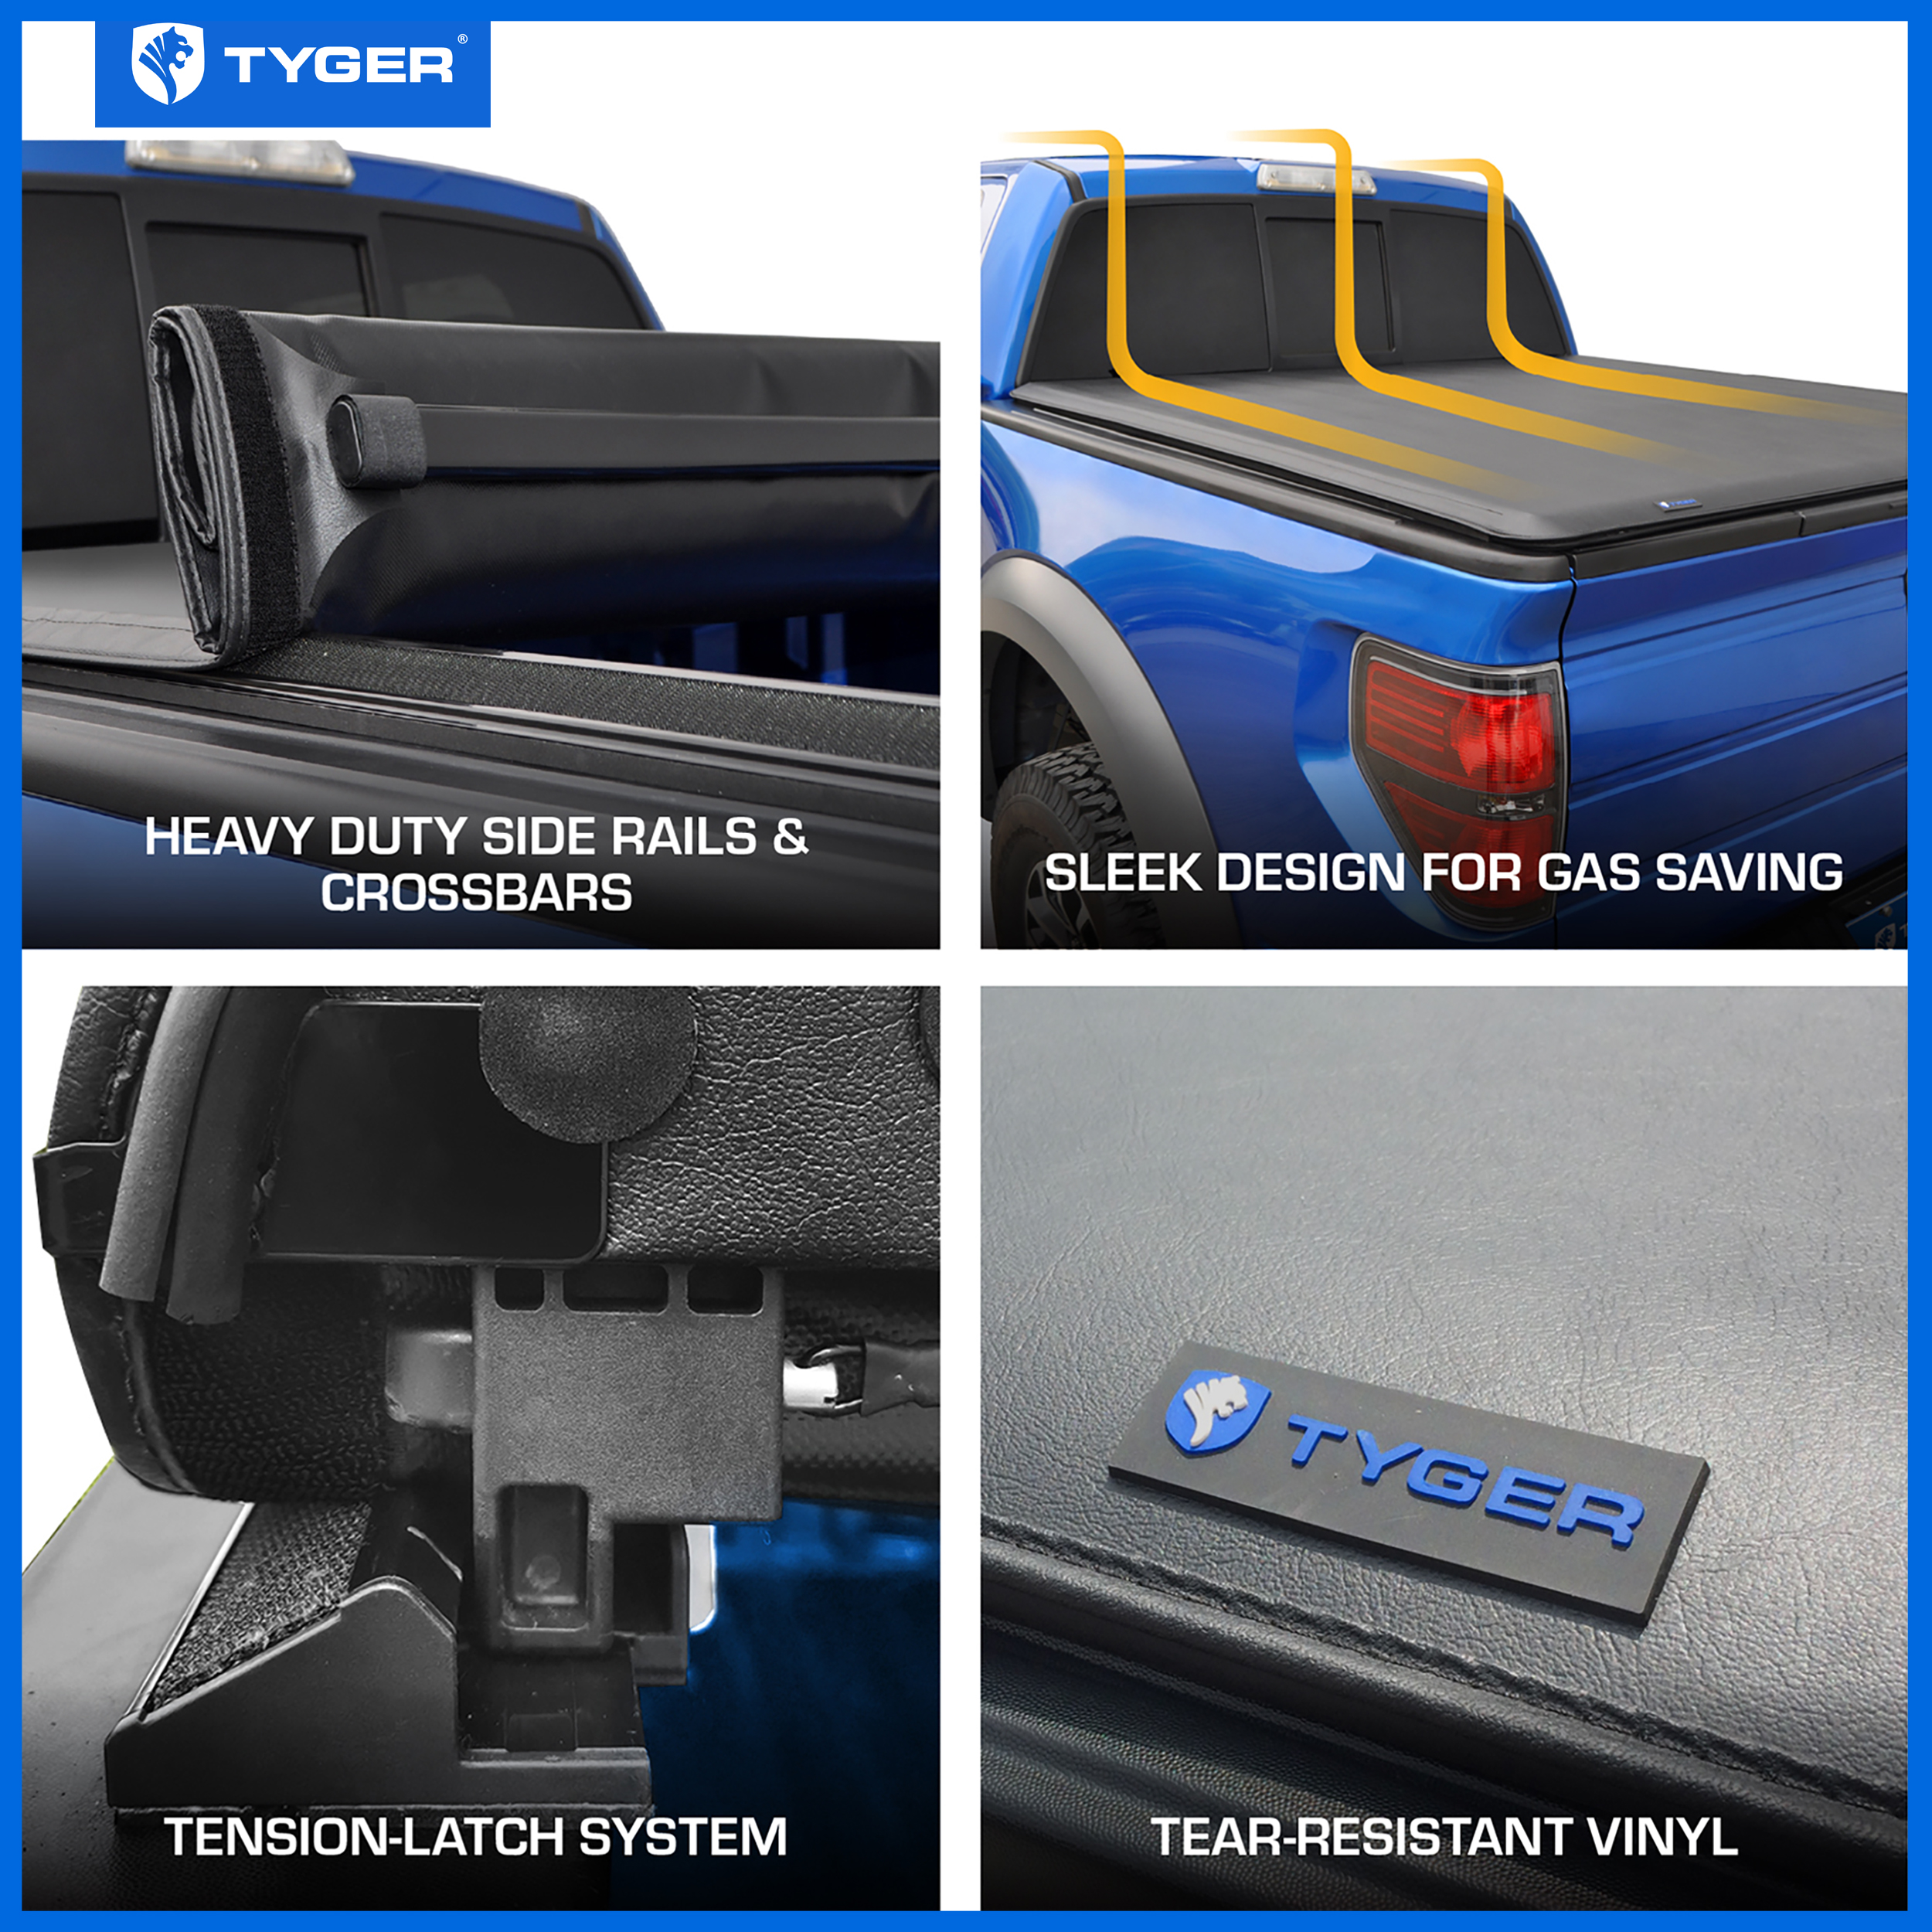 TYGER T1 Soft Roll-up fit 1999-2016 Ford F-250 F-350 Super Duty |